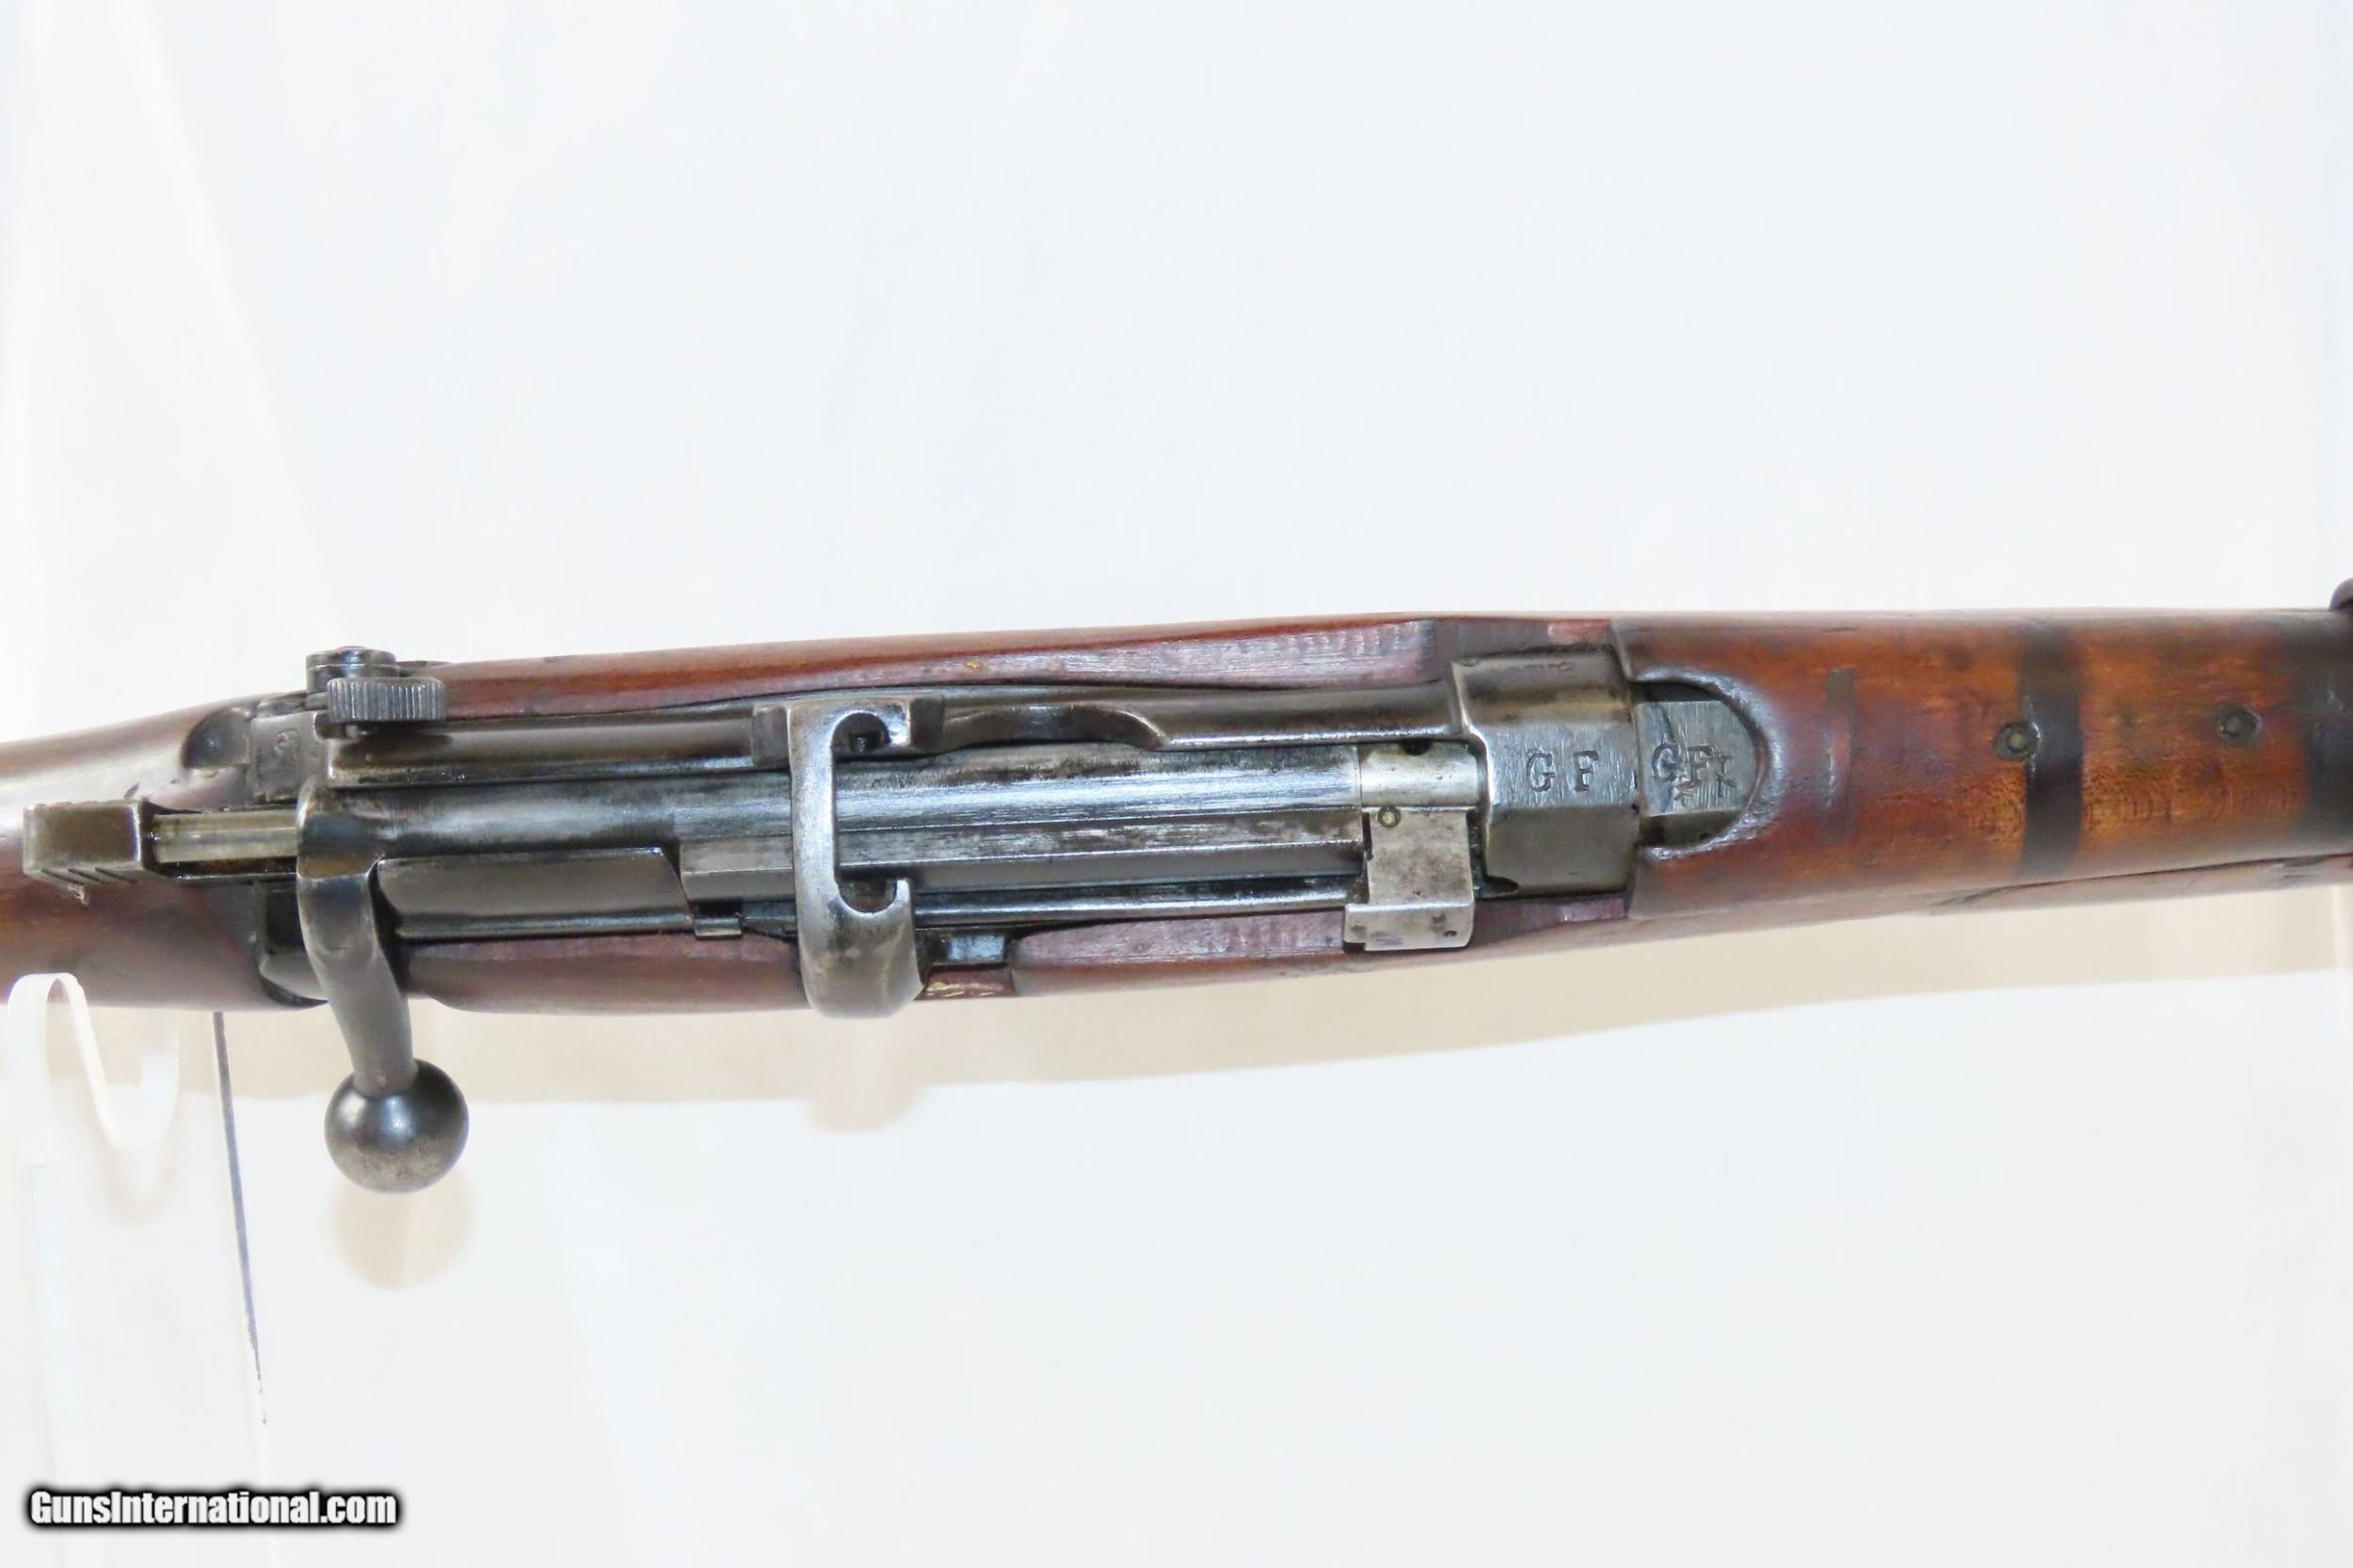 Short Magazine Lee-Enfield .303 in No 1 Mk III bolt action rifle